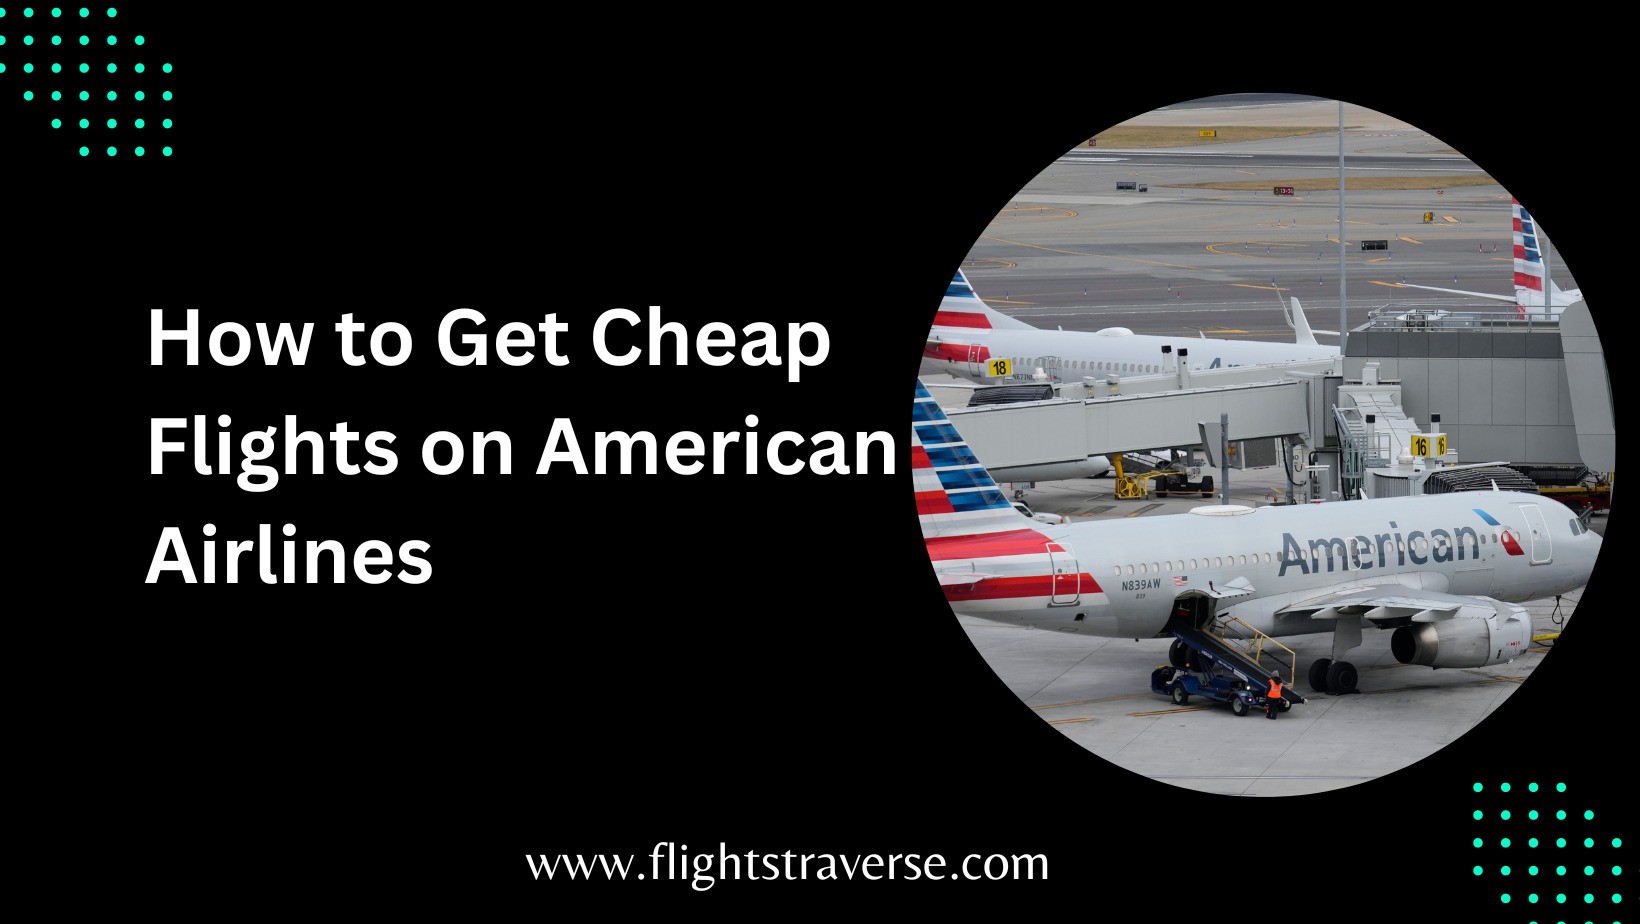 How to Get Cheap Flights on American Airlines?